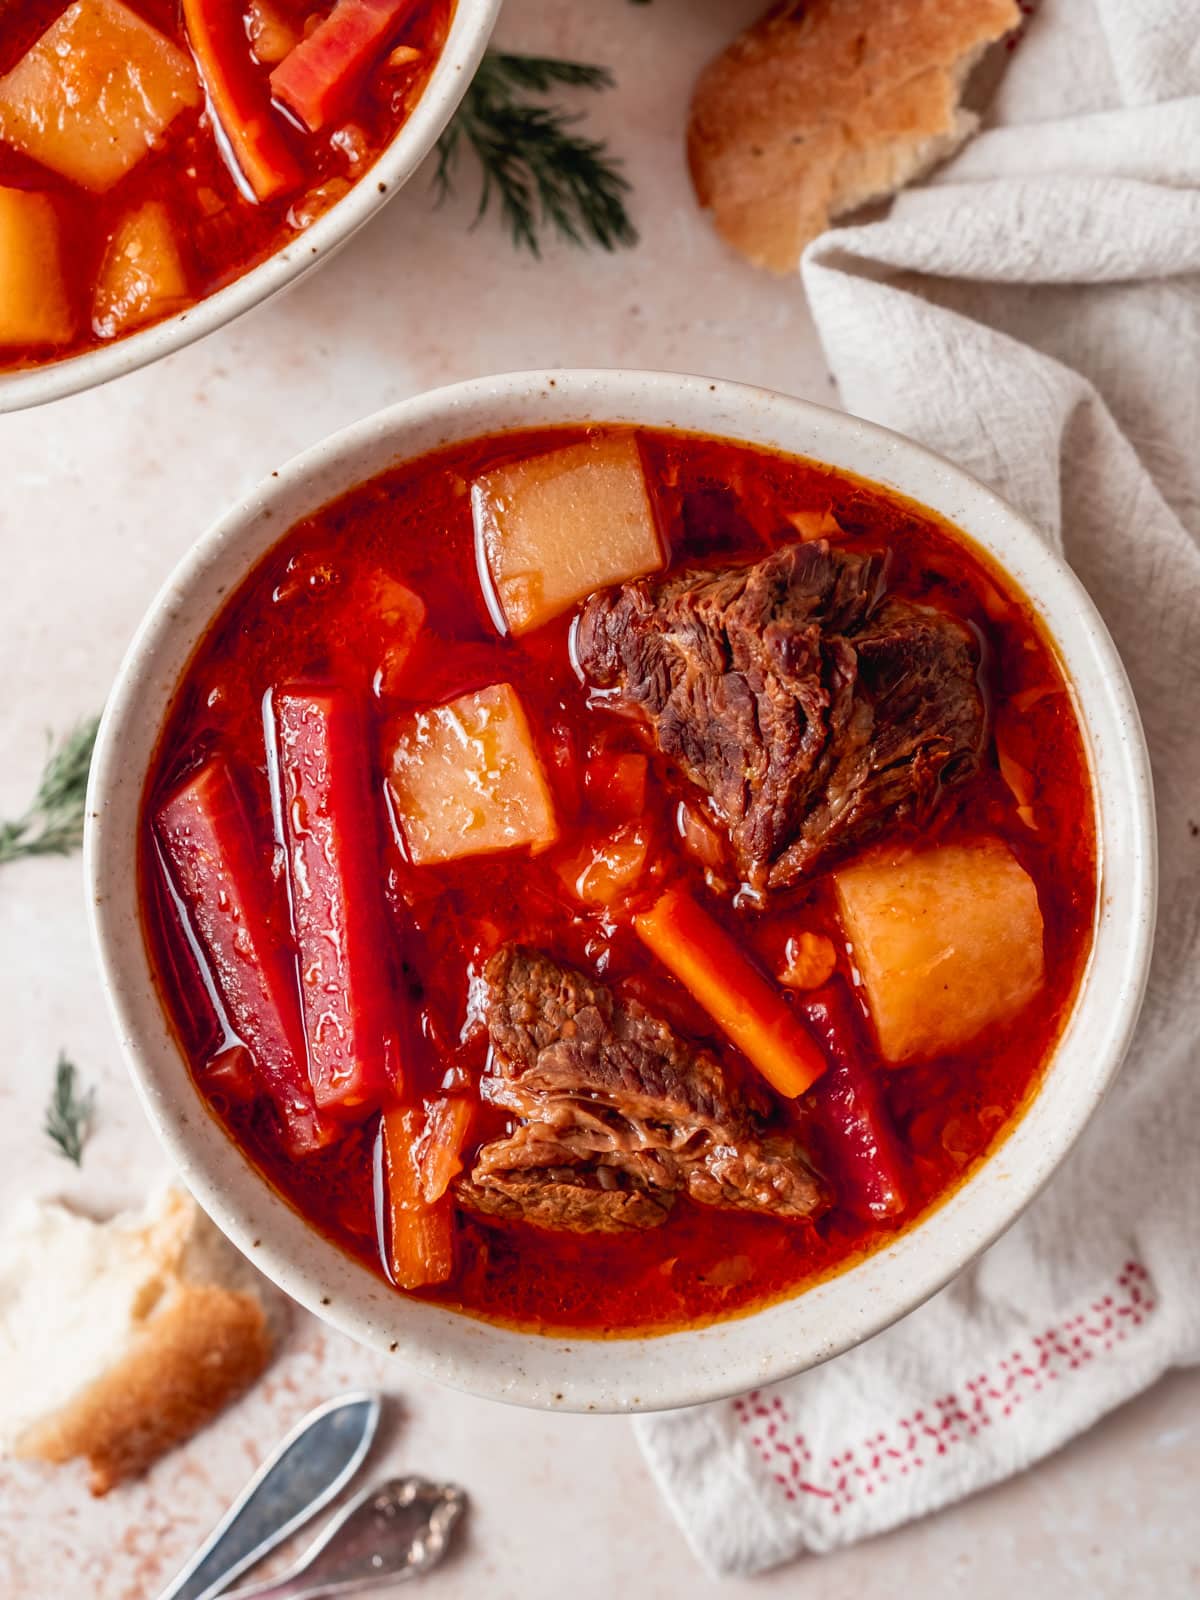 Big bowl of beet borscht with chunks of potatoes and hearty beef pieces.